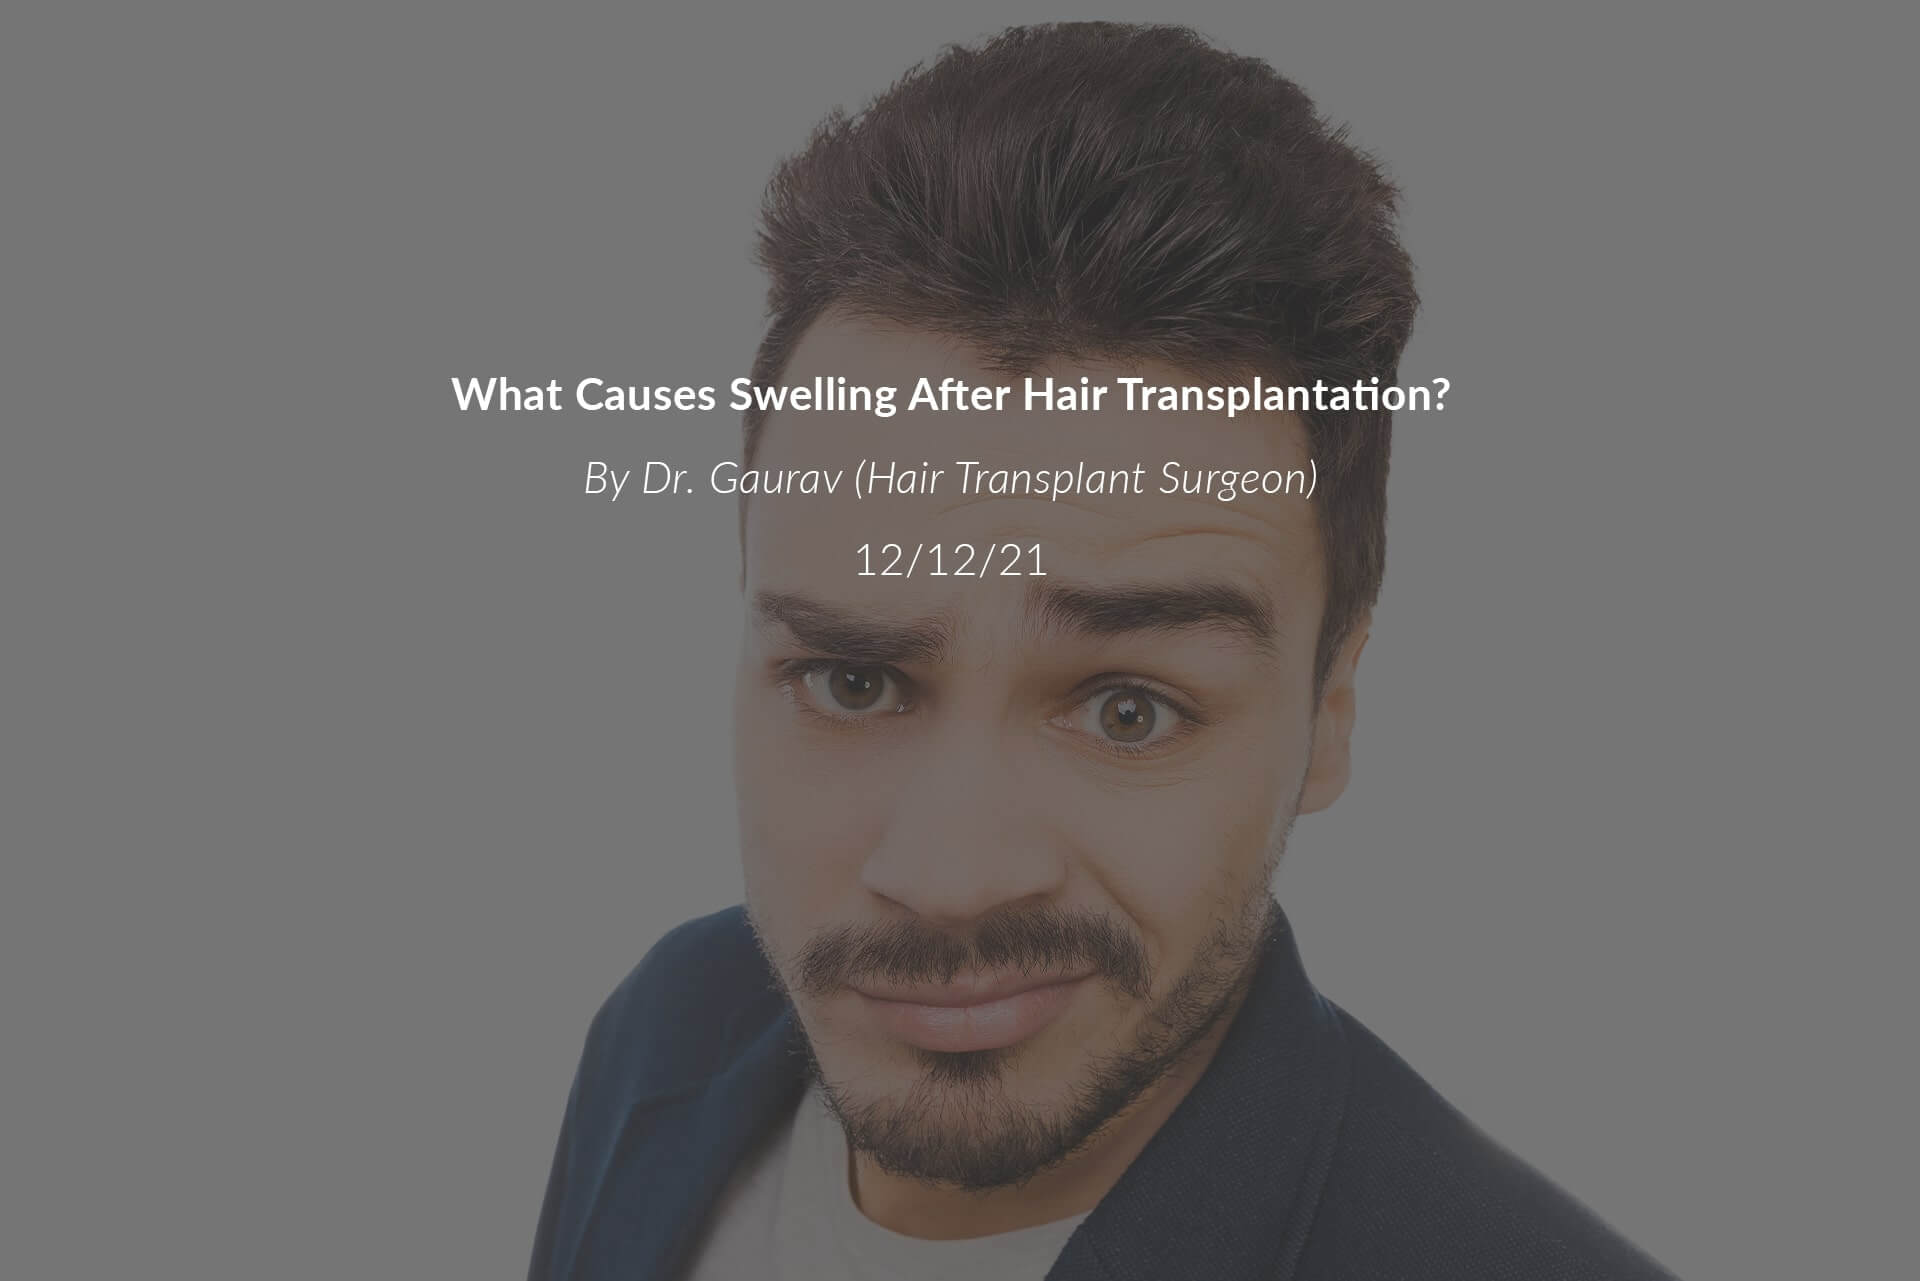 What Causes Swelling After Hair Transplantation?